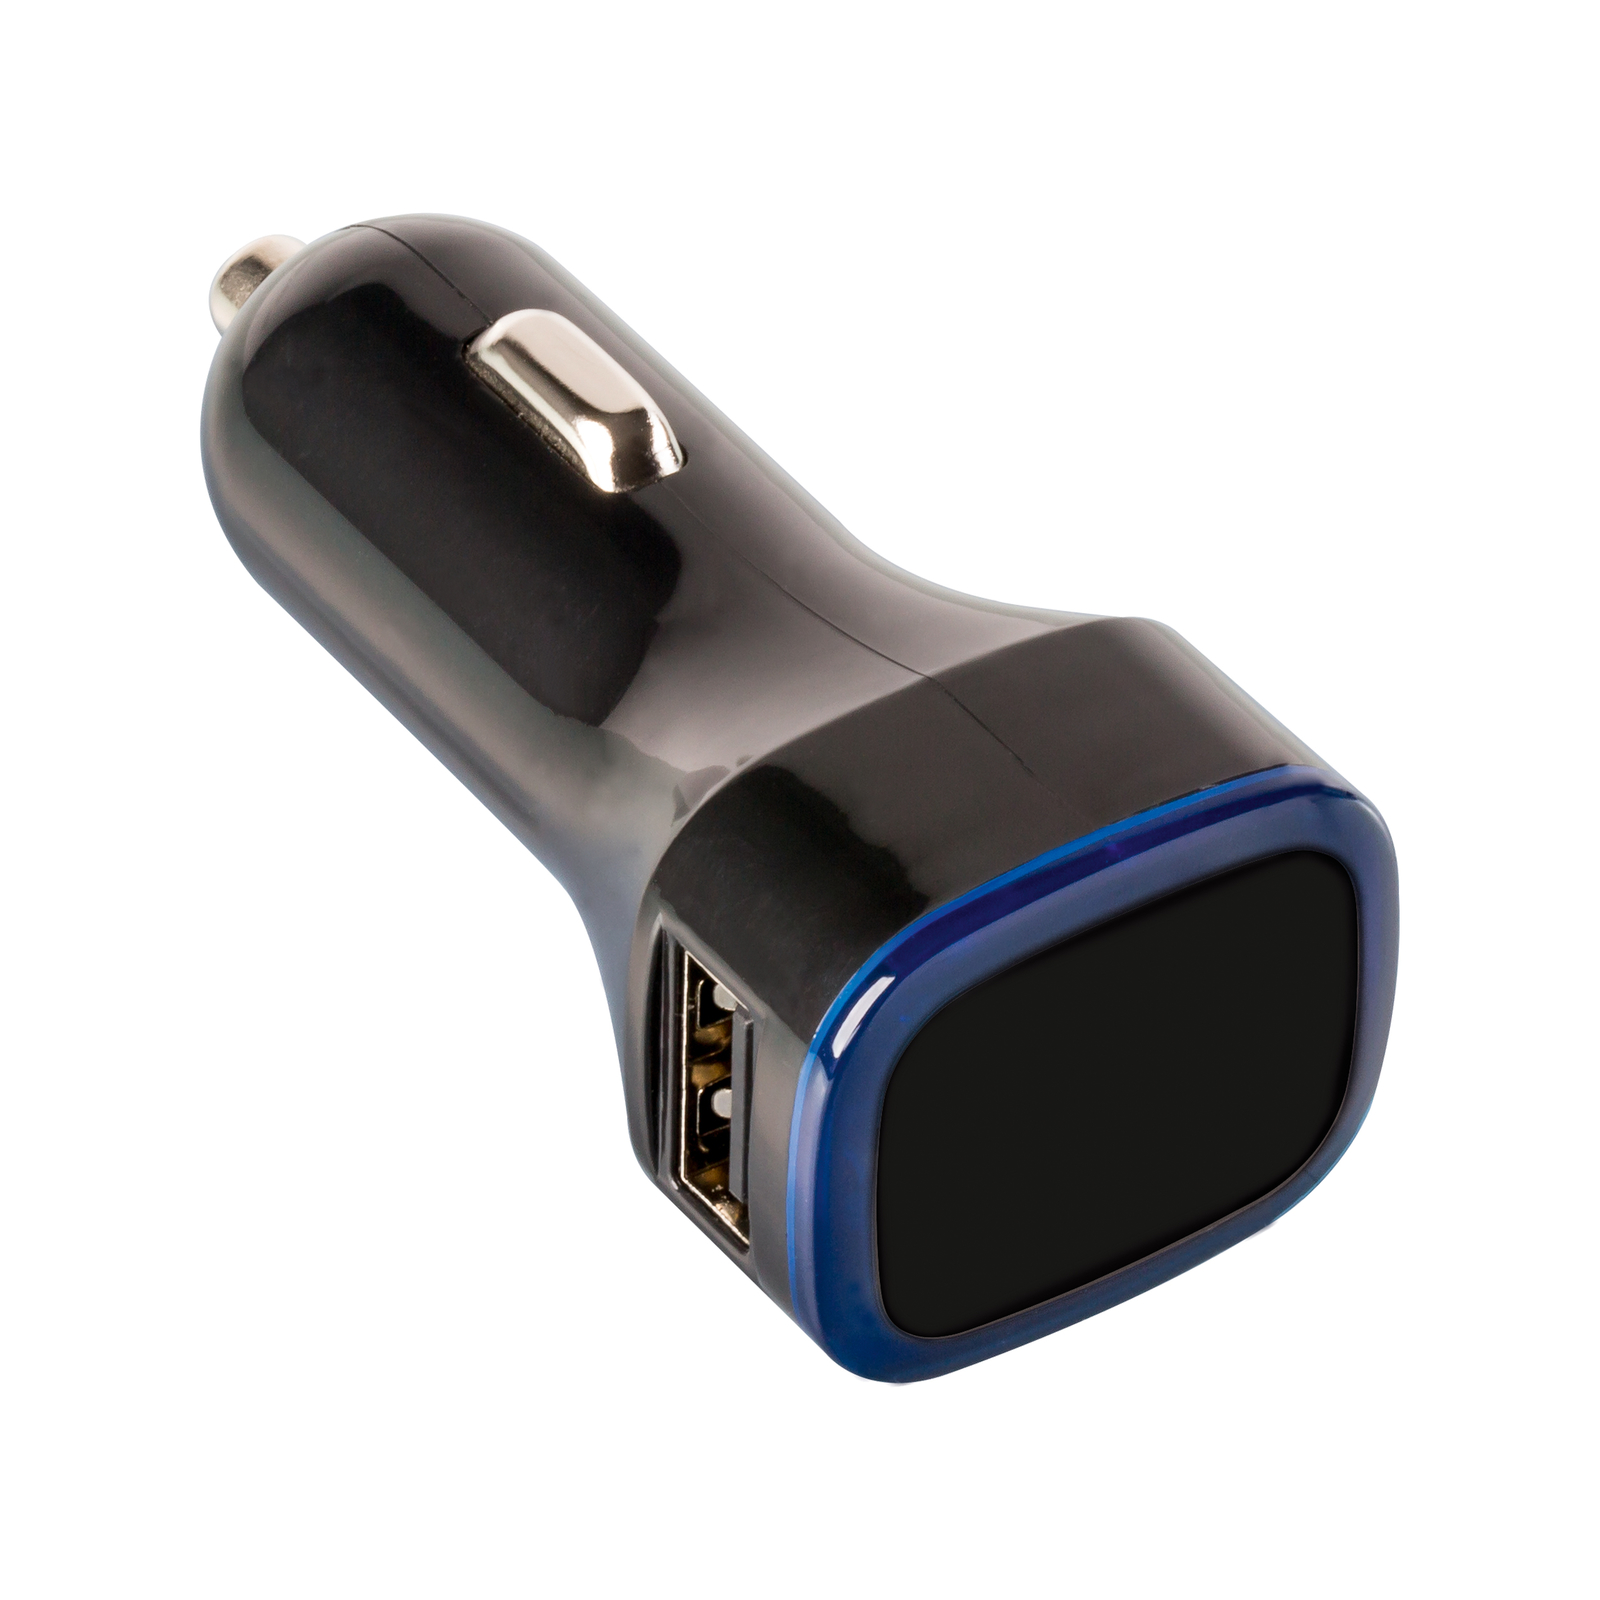 Printed USB car charger adapter RC 500